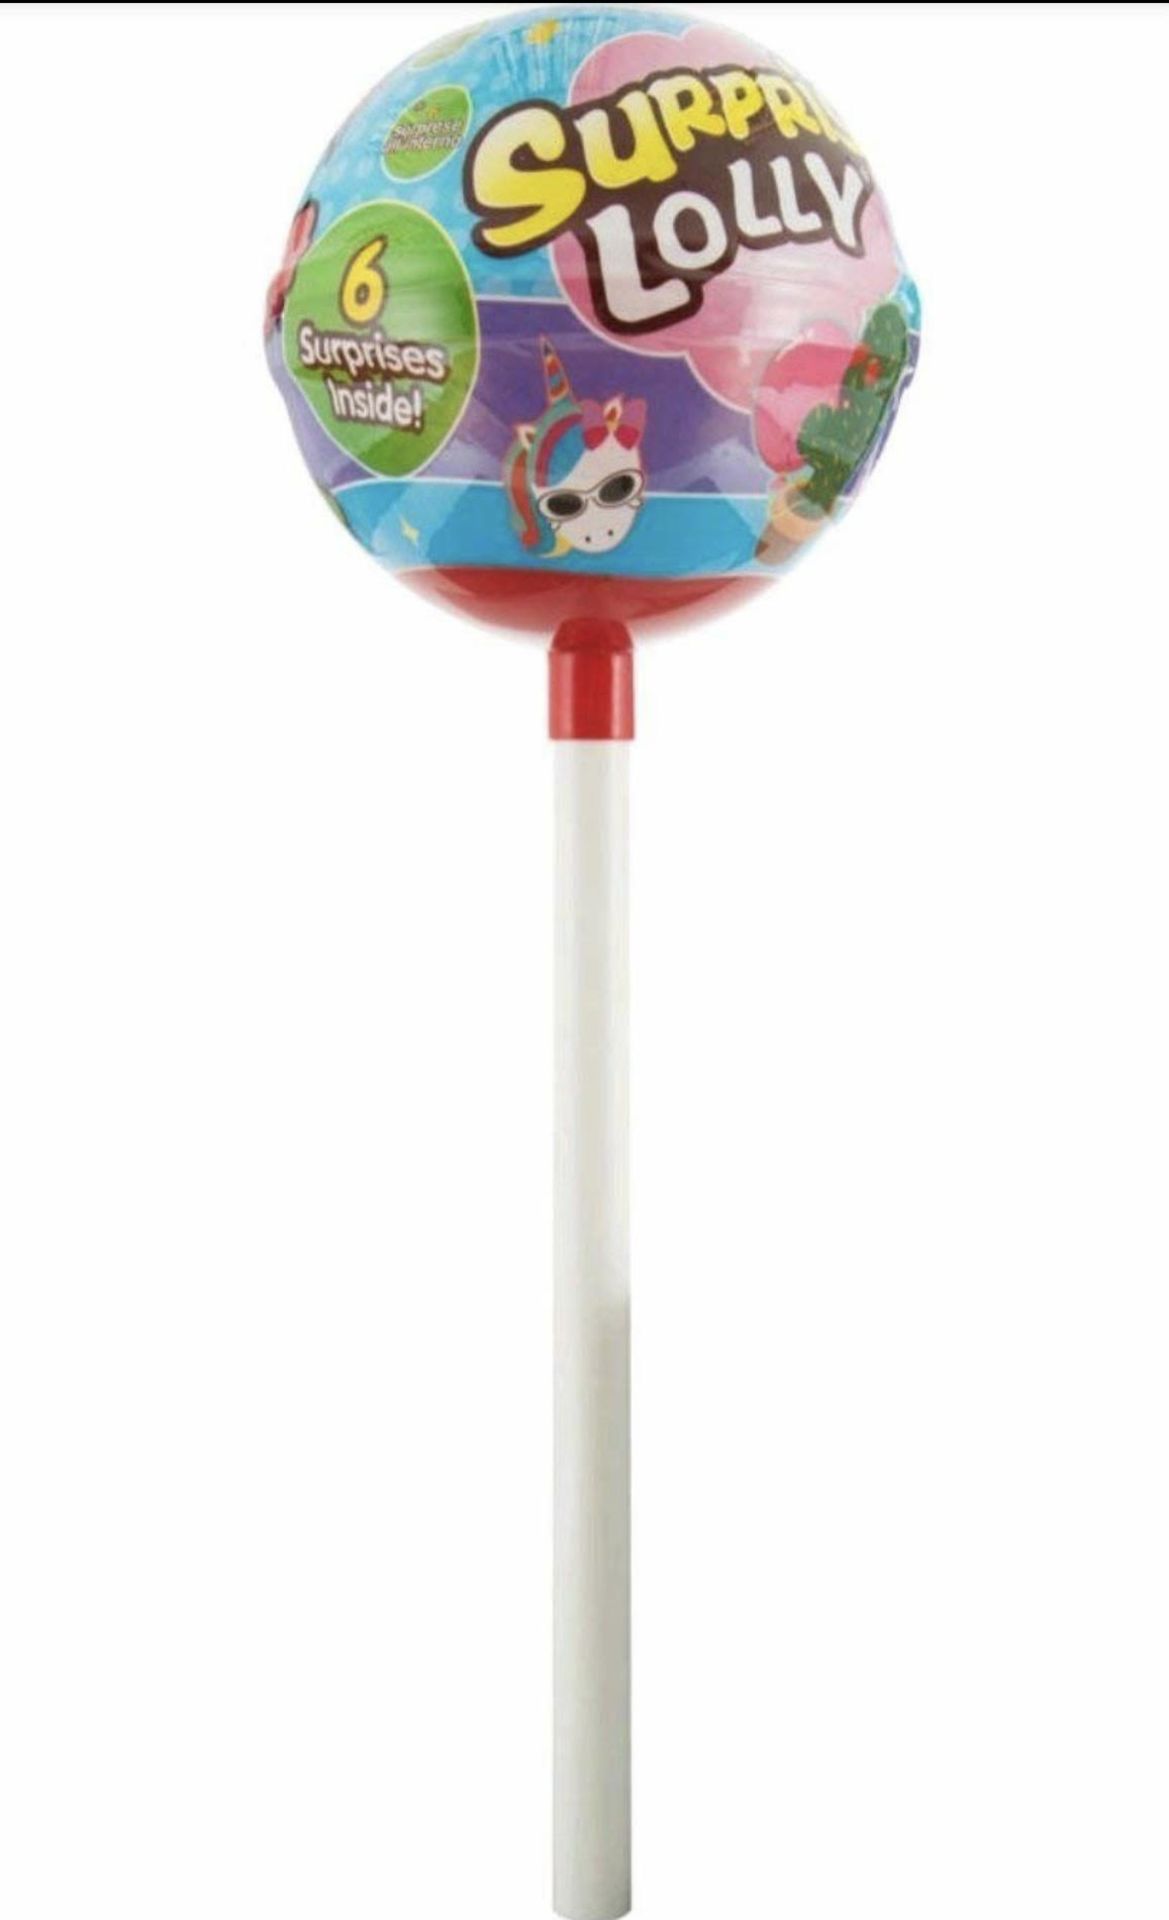 Giant surprise lolly